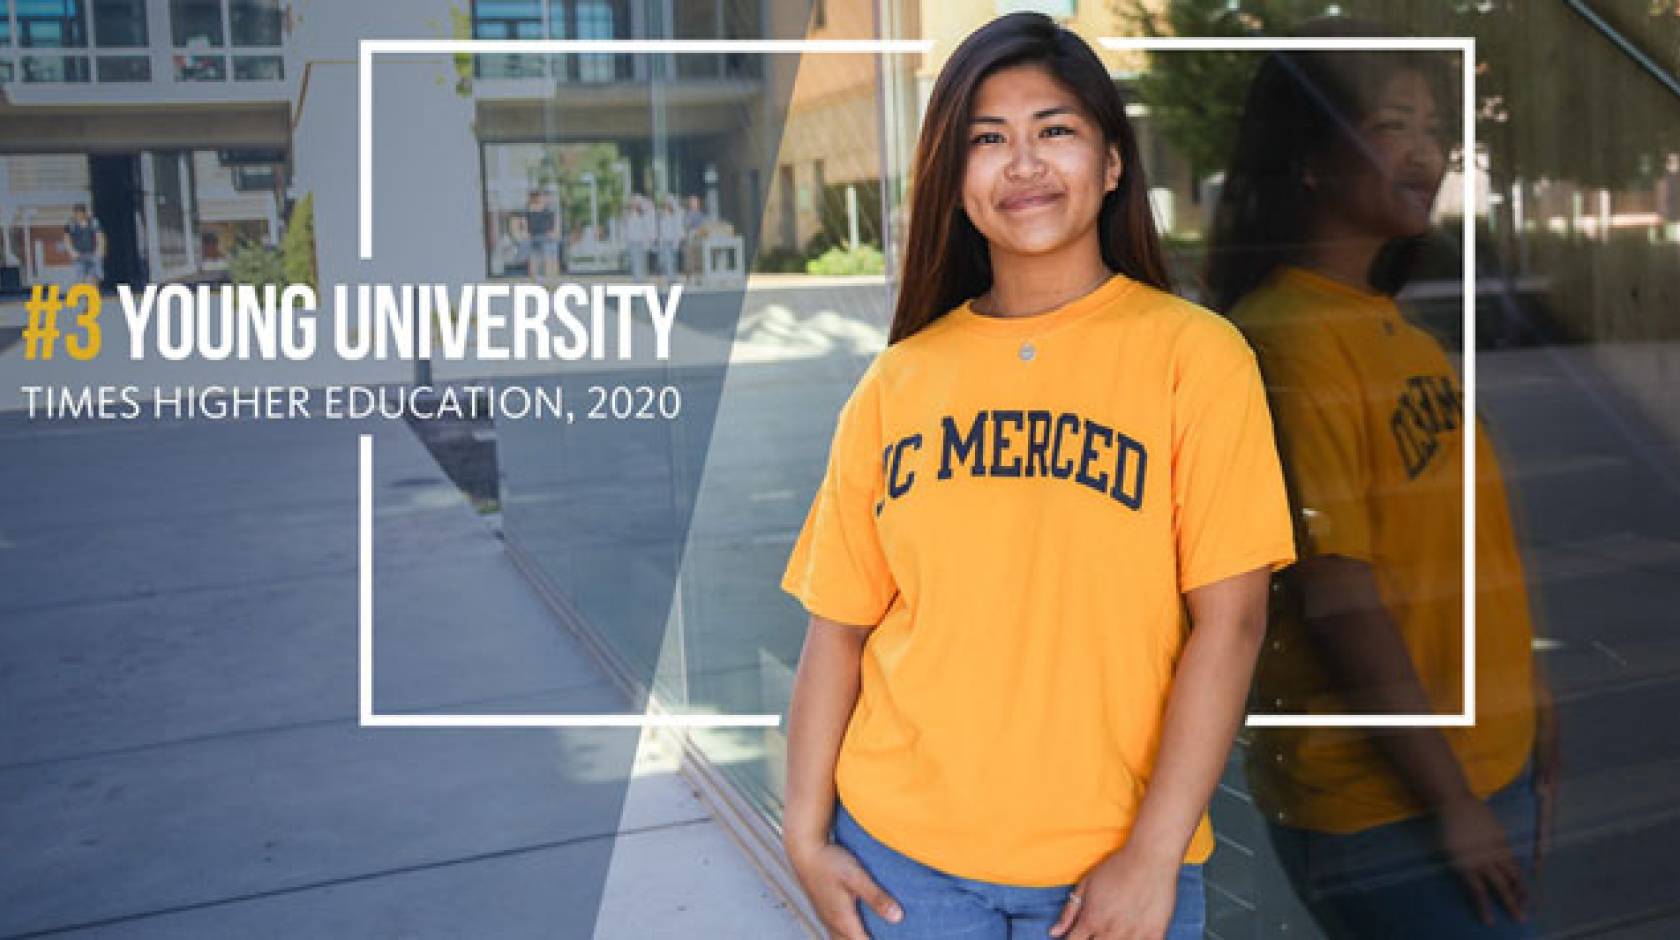 Times Higher Ed UC Merced ranking text with student standing outside in UC Merced T-shirt next to it